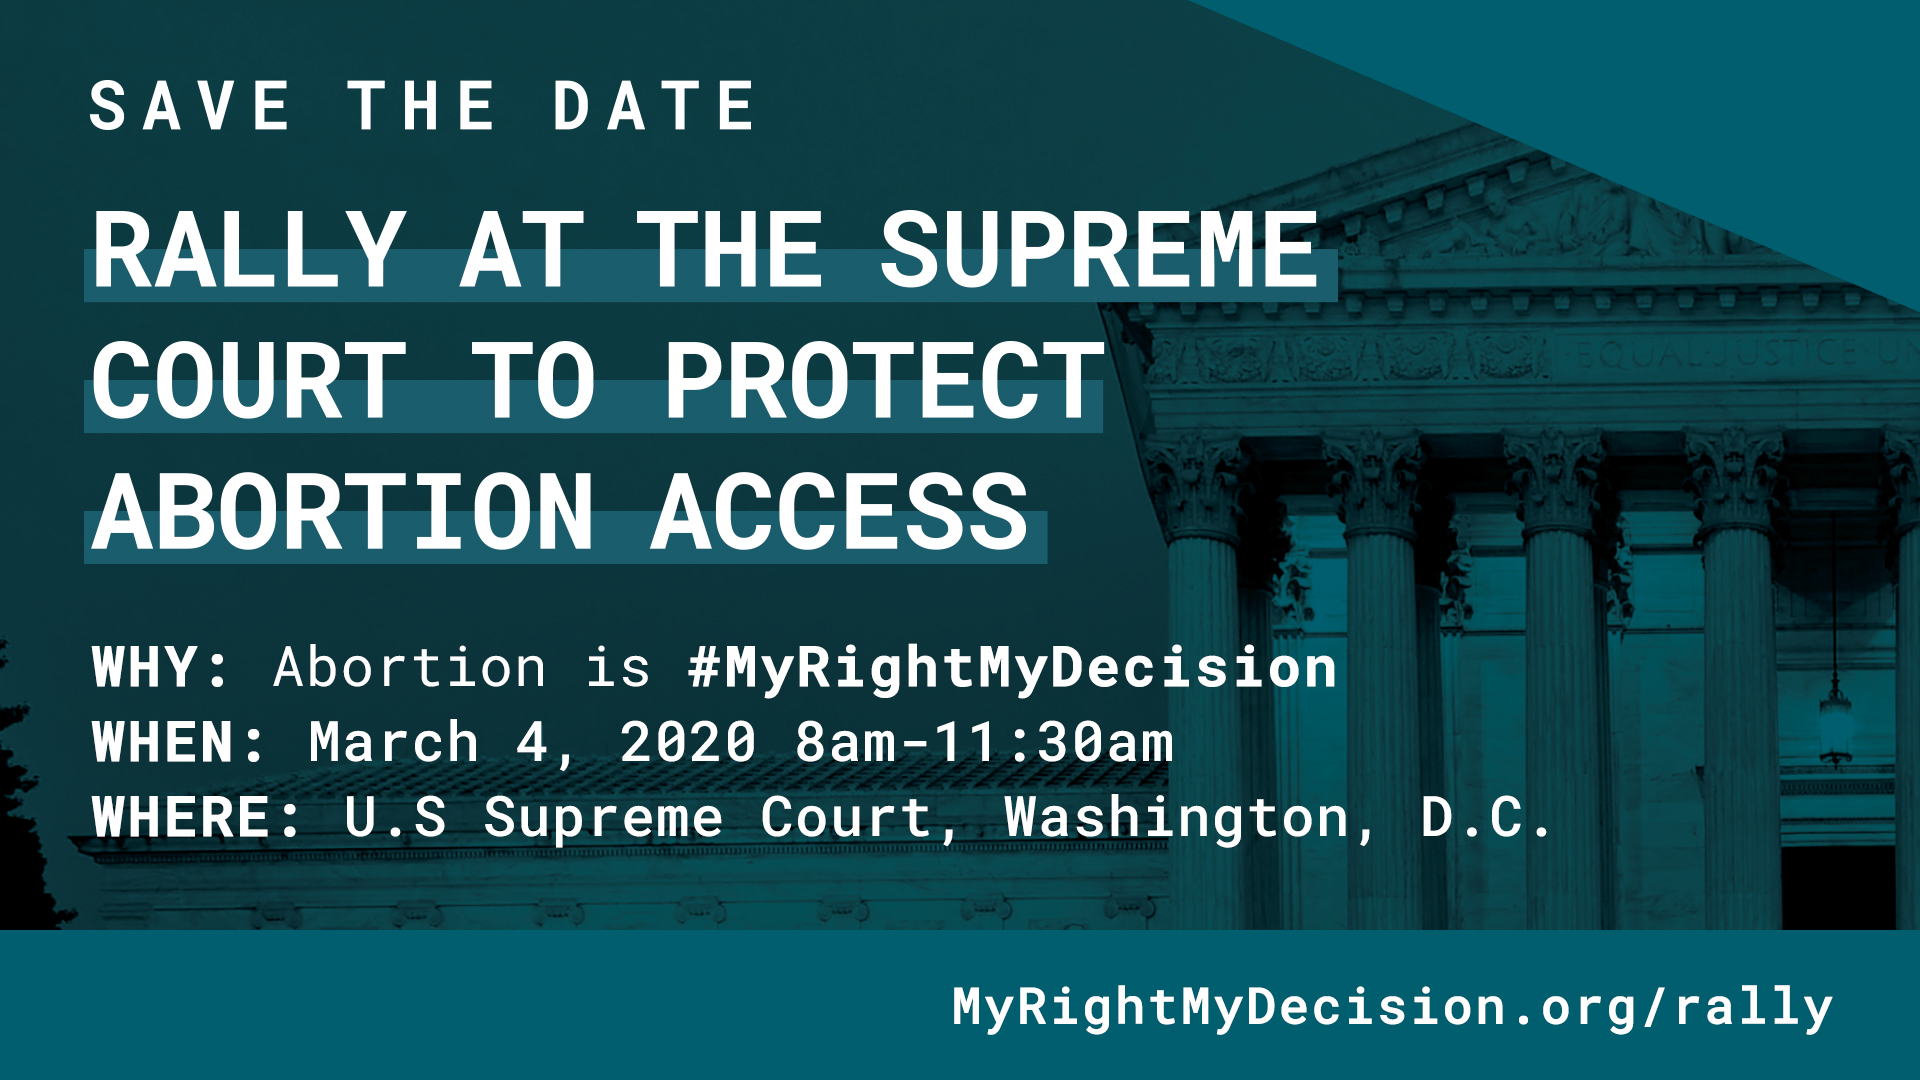 A save the date card with the rally details. Why: Abortion is #MyRightMyDecision When: March 4, 2020 at 8am. Where: US Supreme Court, Washington, DC.